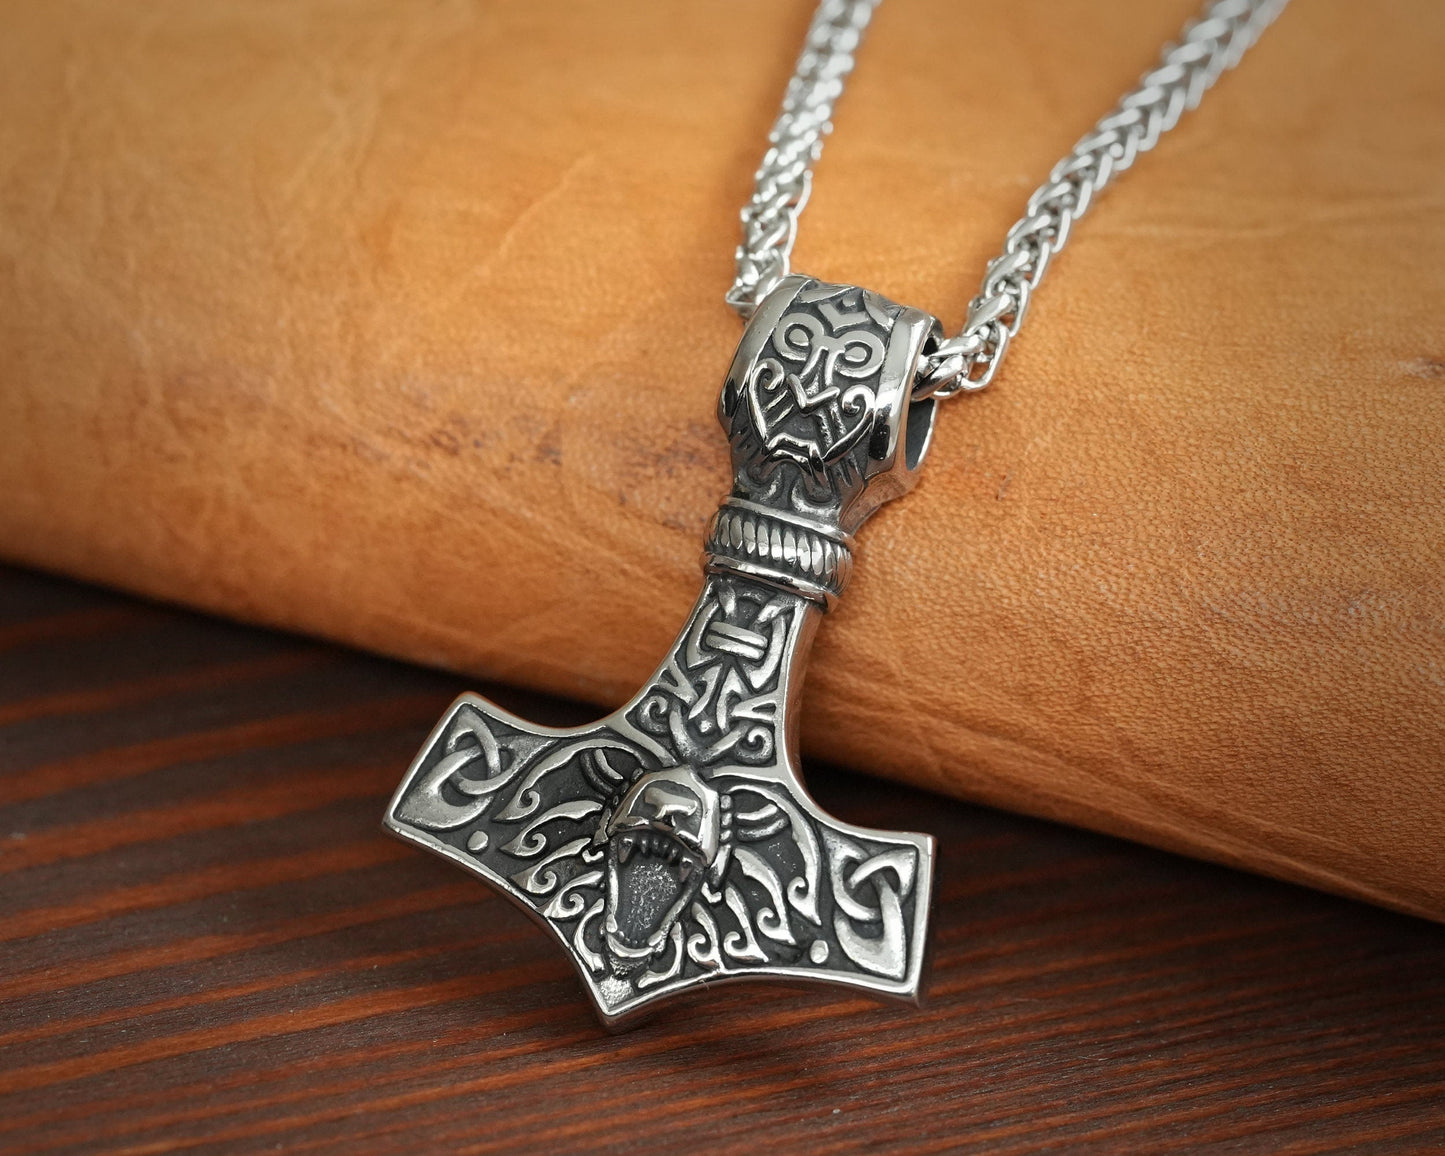 925 Sterling Silver Bear Wolf Viking Thors Hammer Necklace Pendant - Courage and Strength Amulet Talisman - Thor Gifts for Men - Viking - Baldur Jewelry